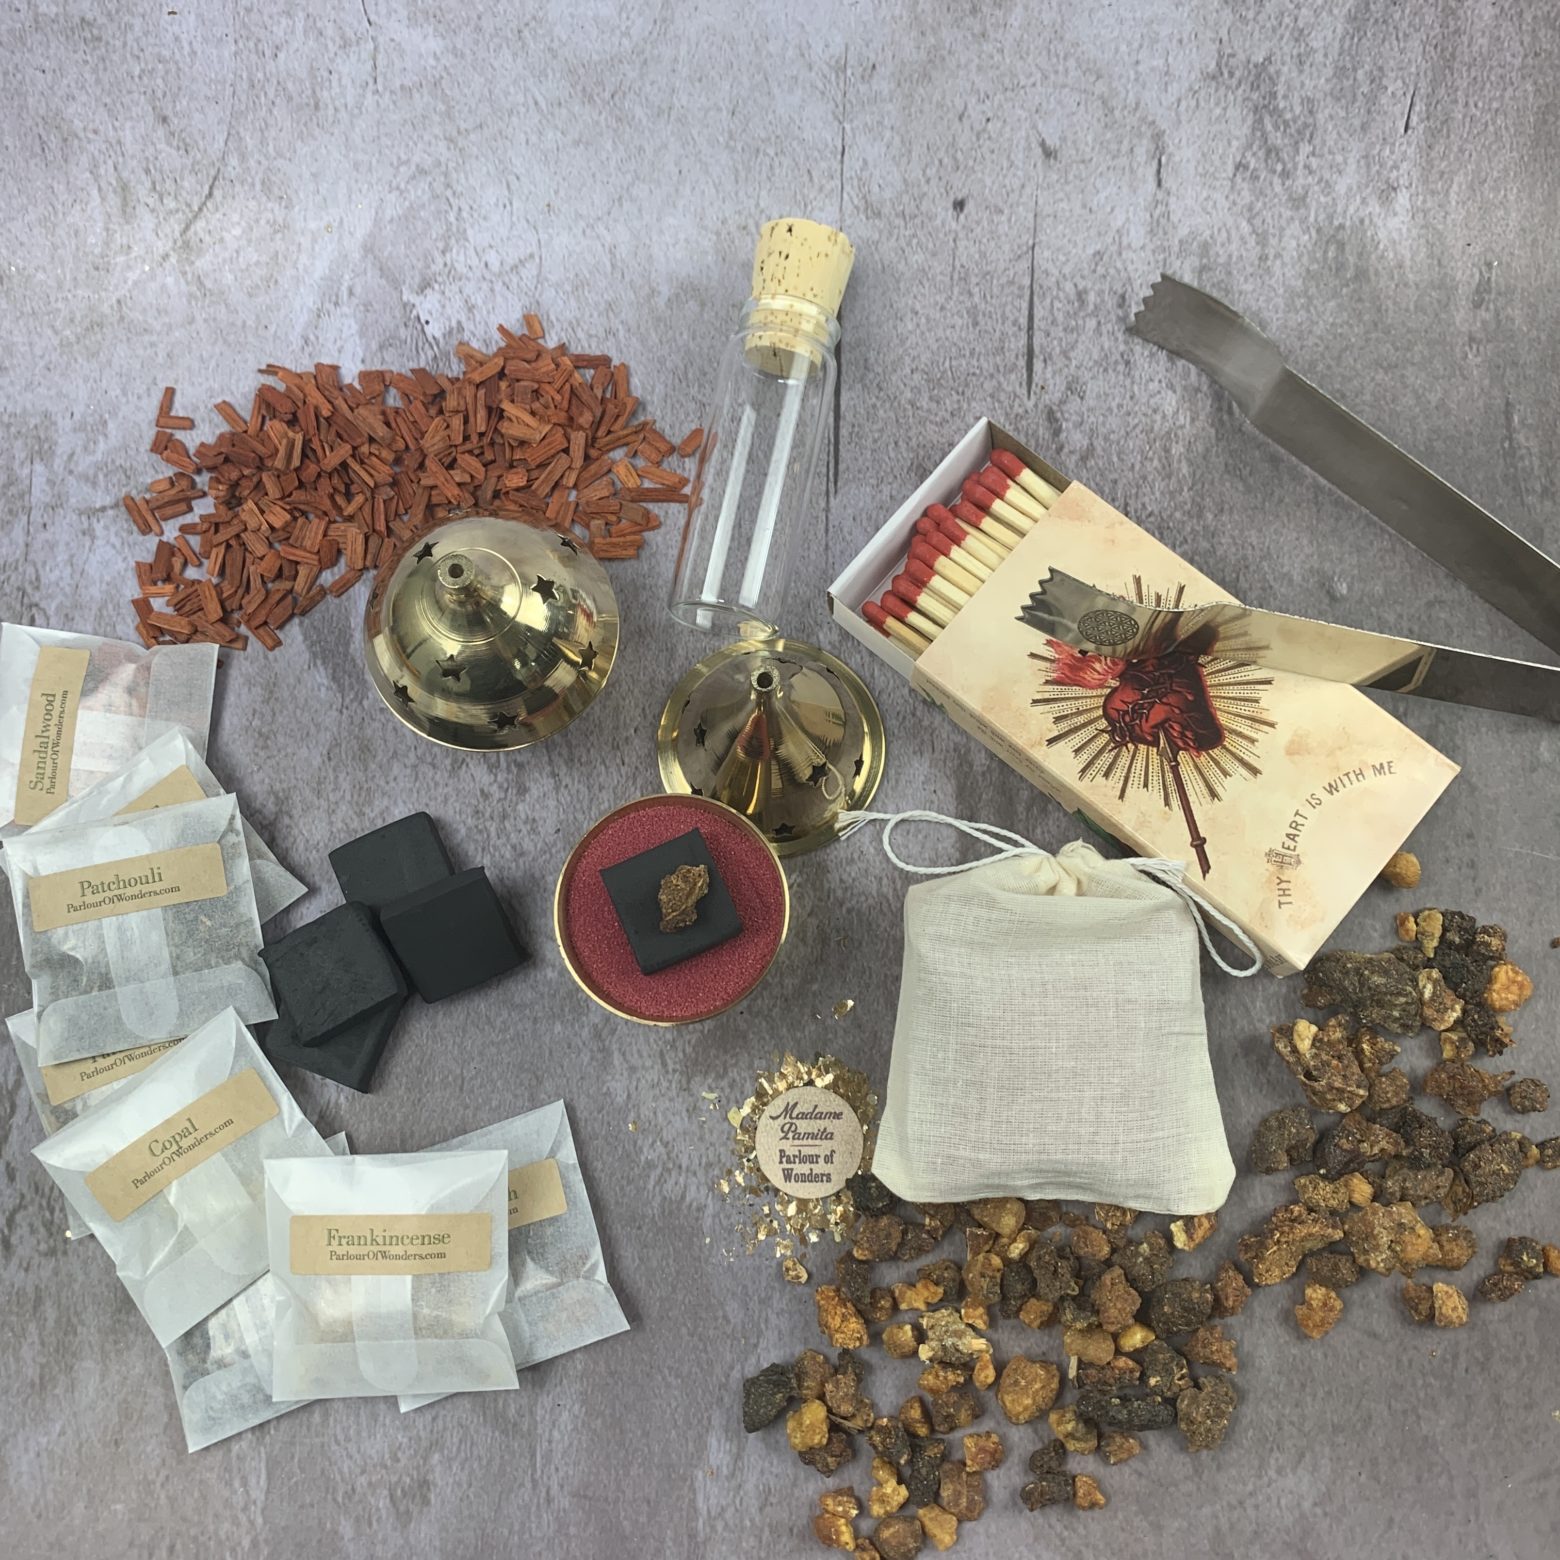 October Aries Full Moon Passion Incense Spell Kit and Workshop